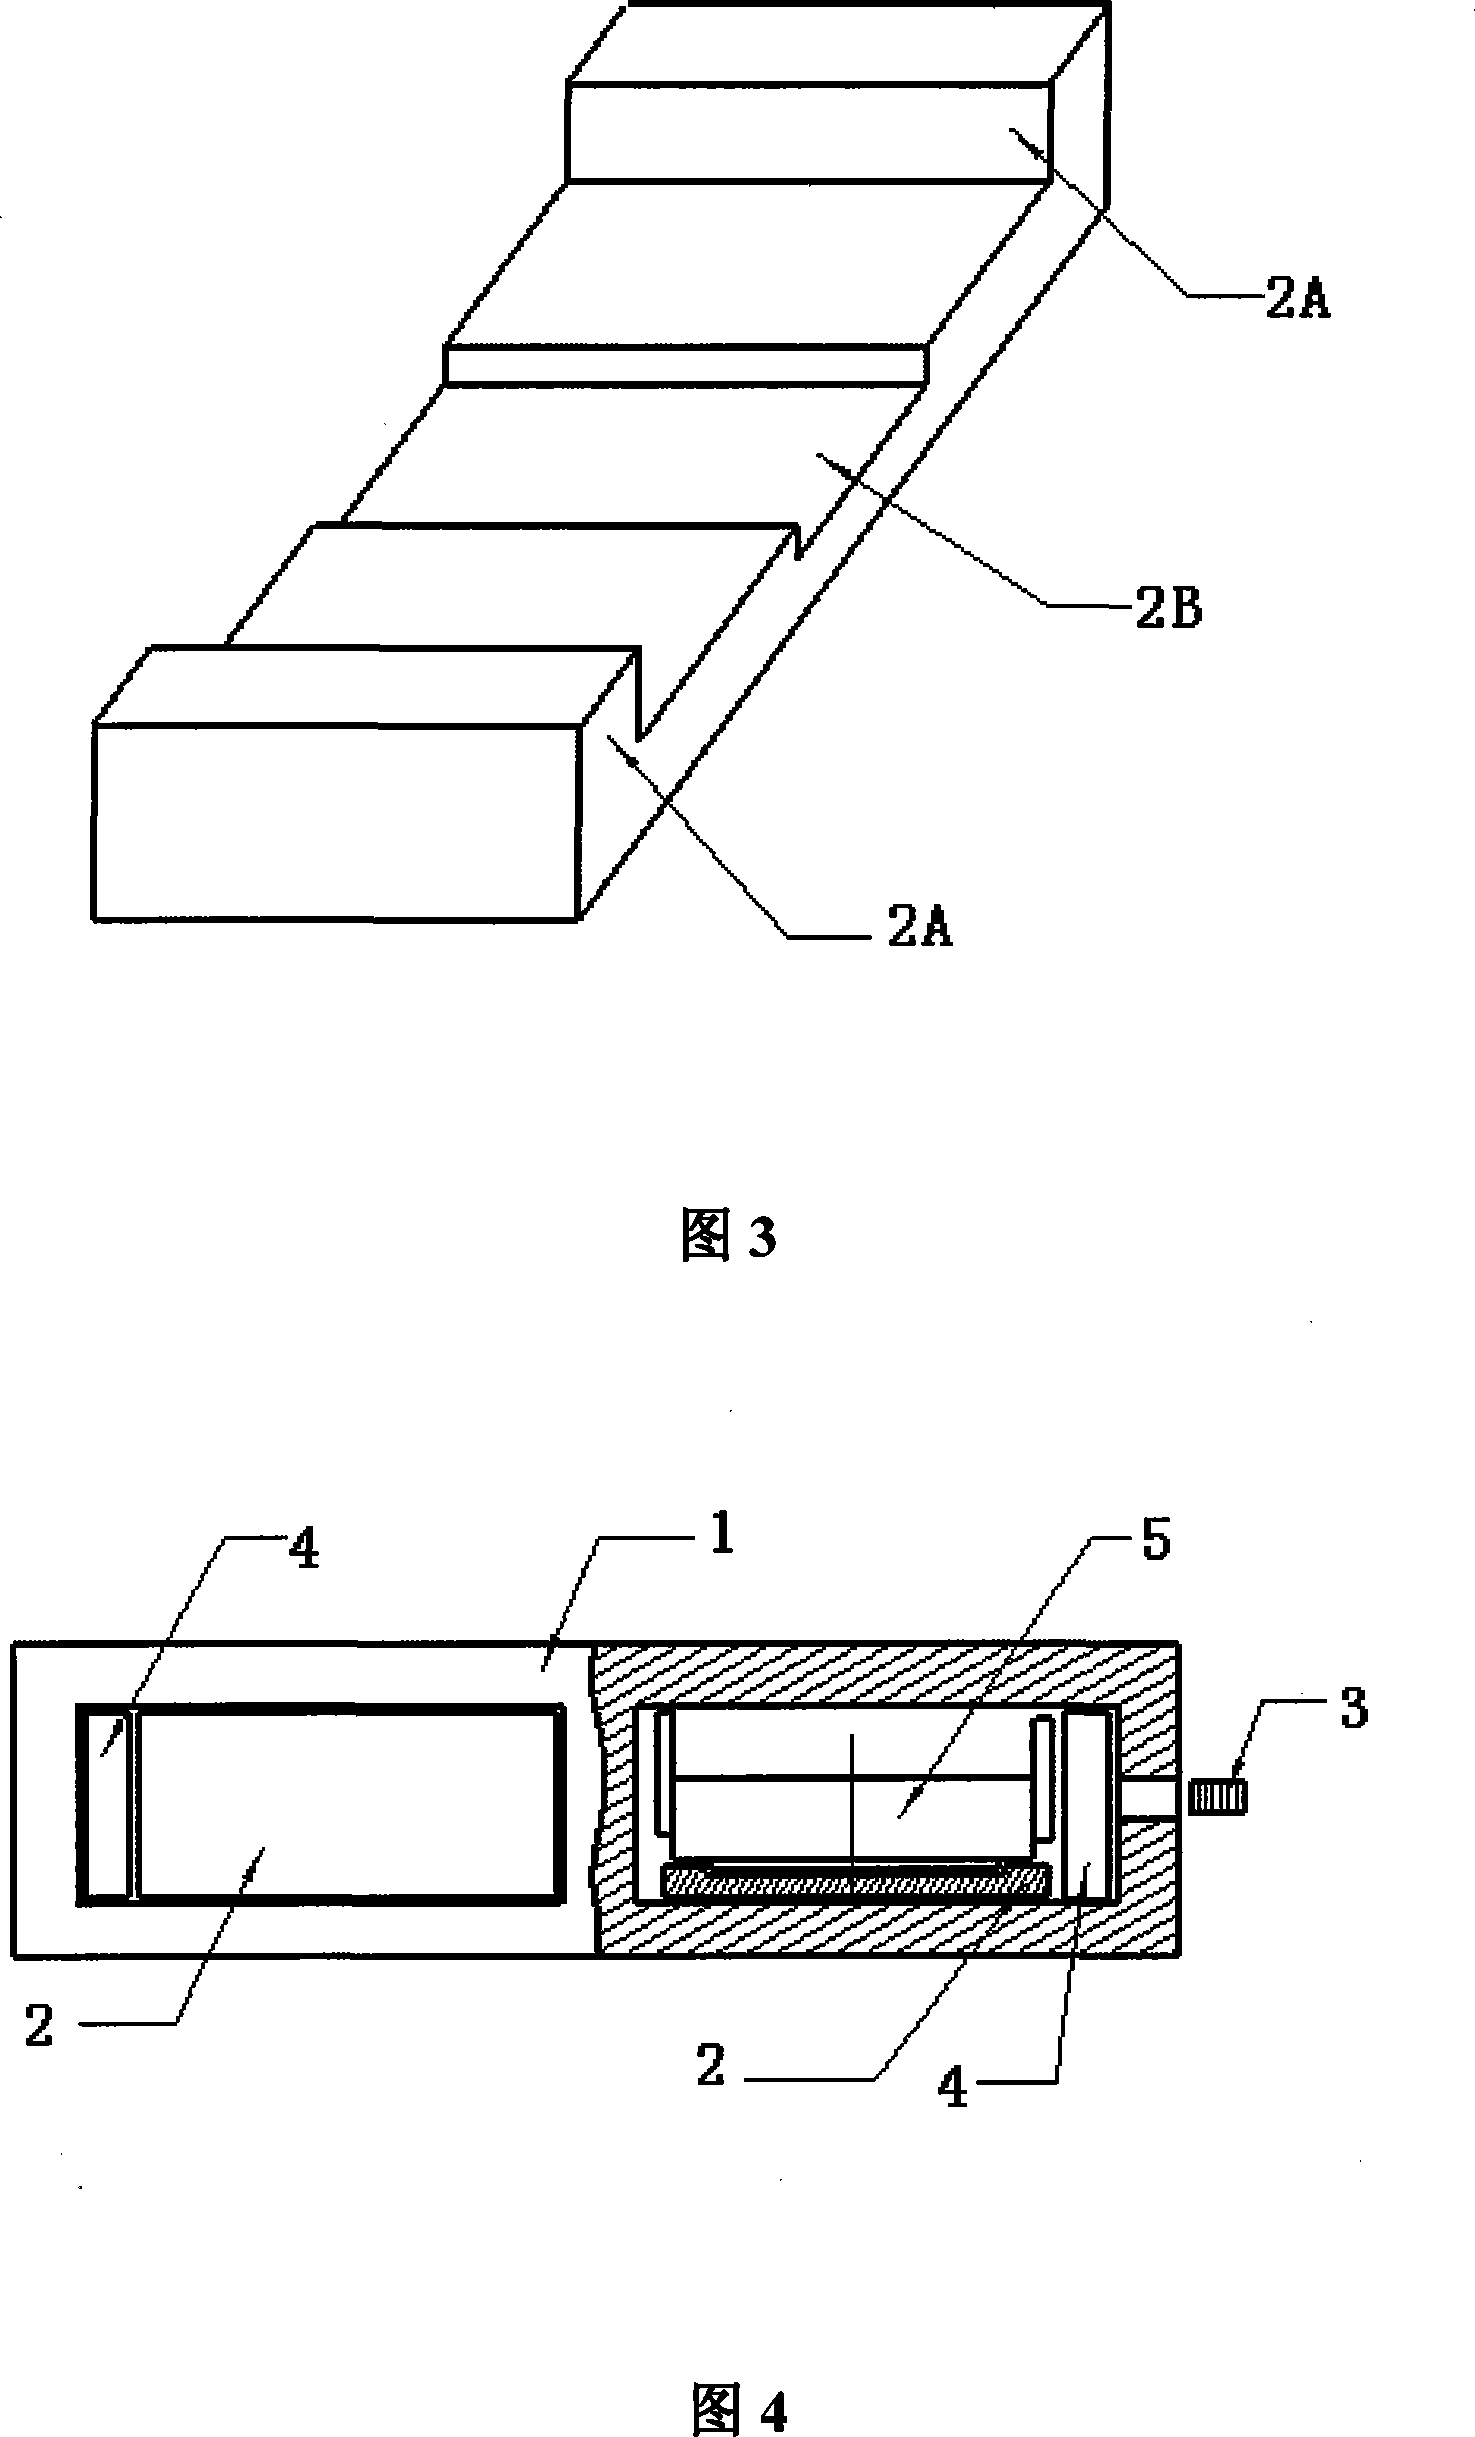 Ceramic double arrange packaging device high accelerate centrifugation experiment cramping apparatus